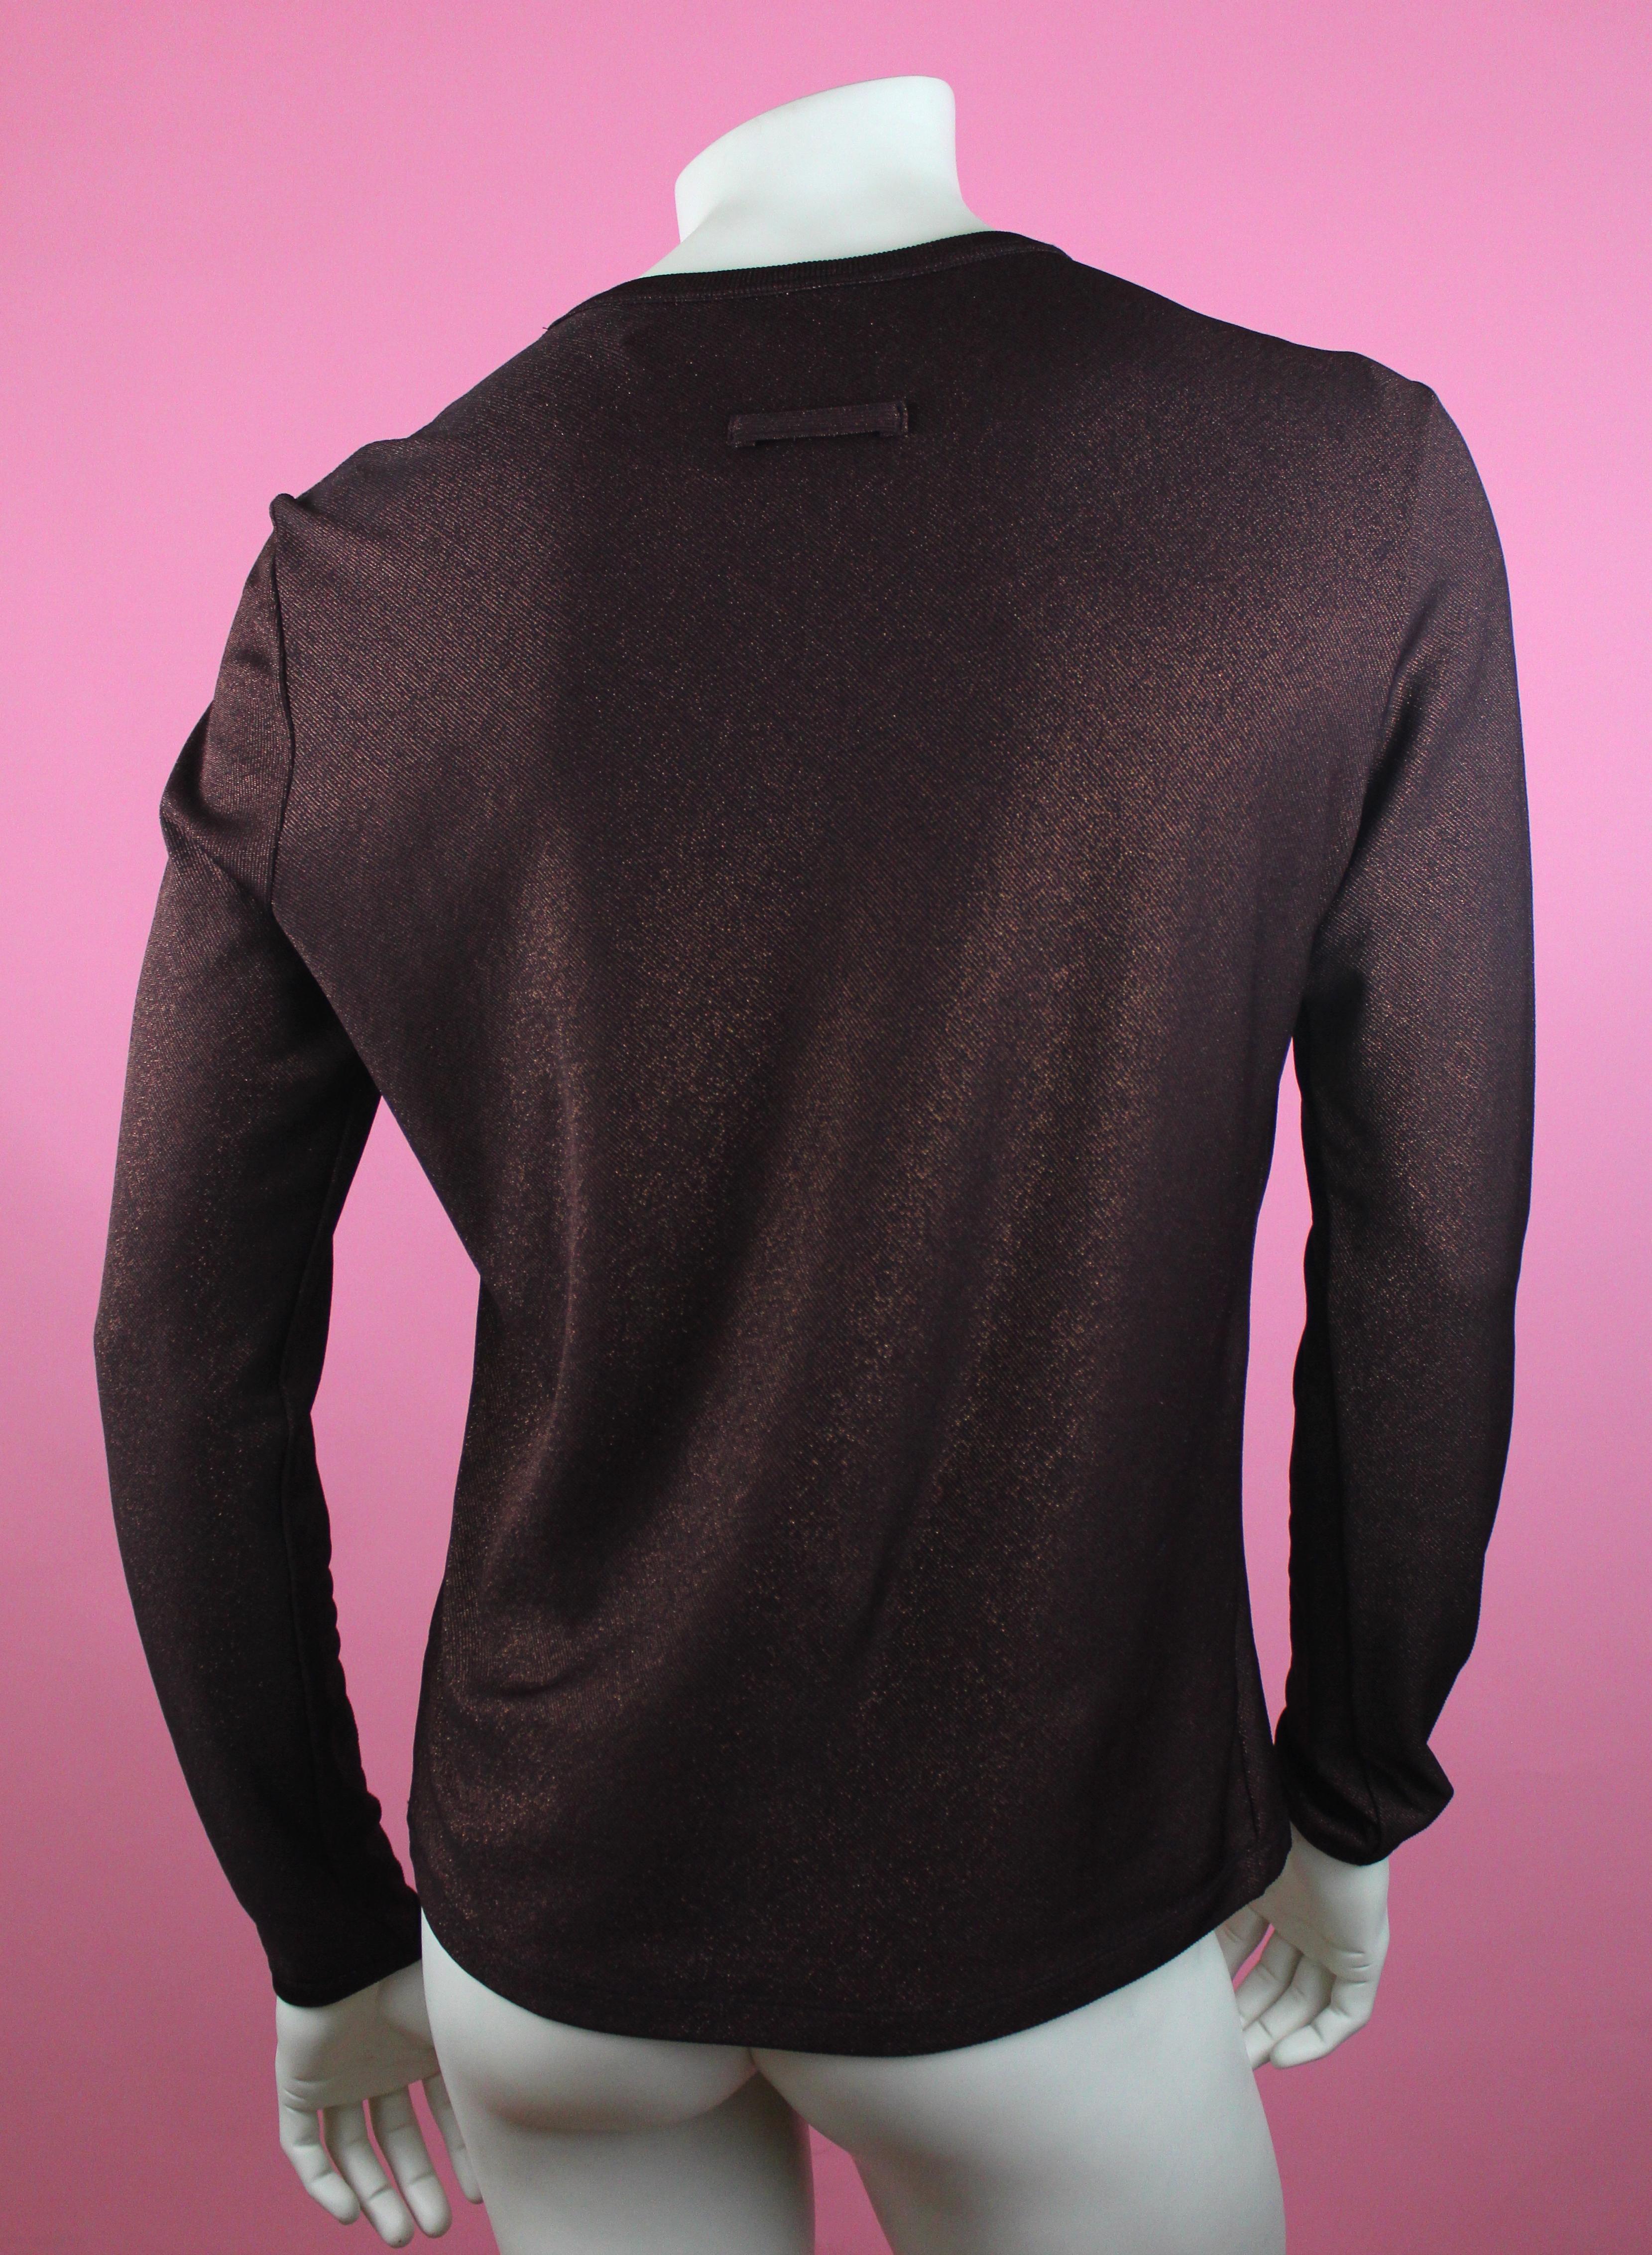 Jean Paul Gauliter Classique Burgundy Lurex Long Sleeve Shirt, Size 54 IT In New Condition For Sale In Los Angeles, CA